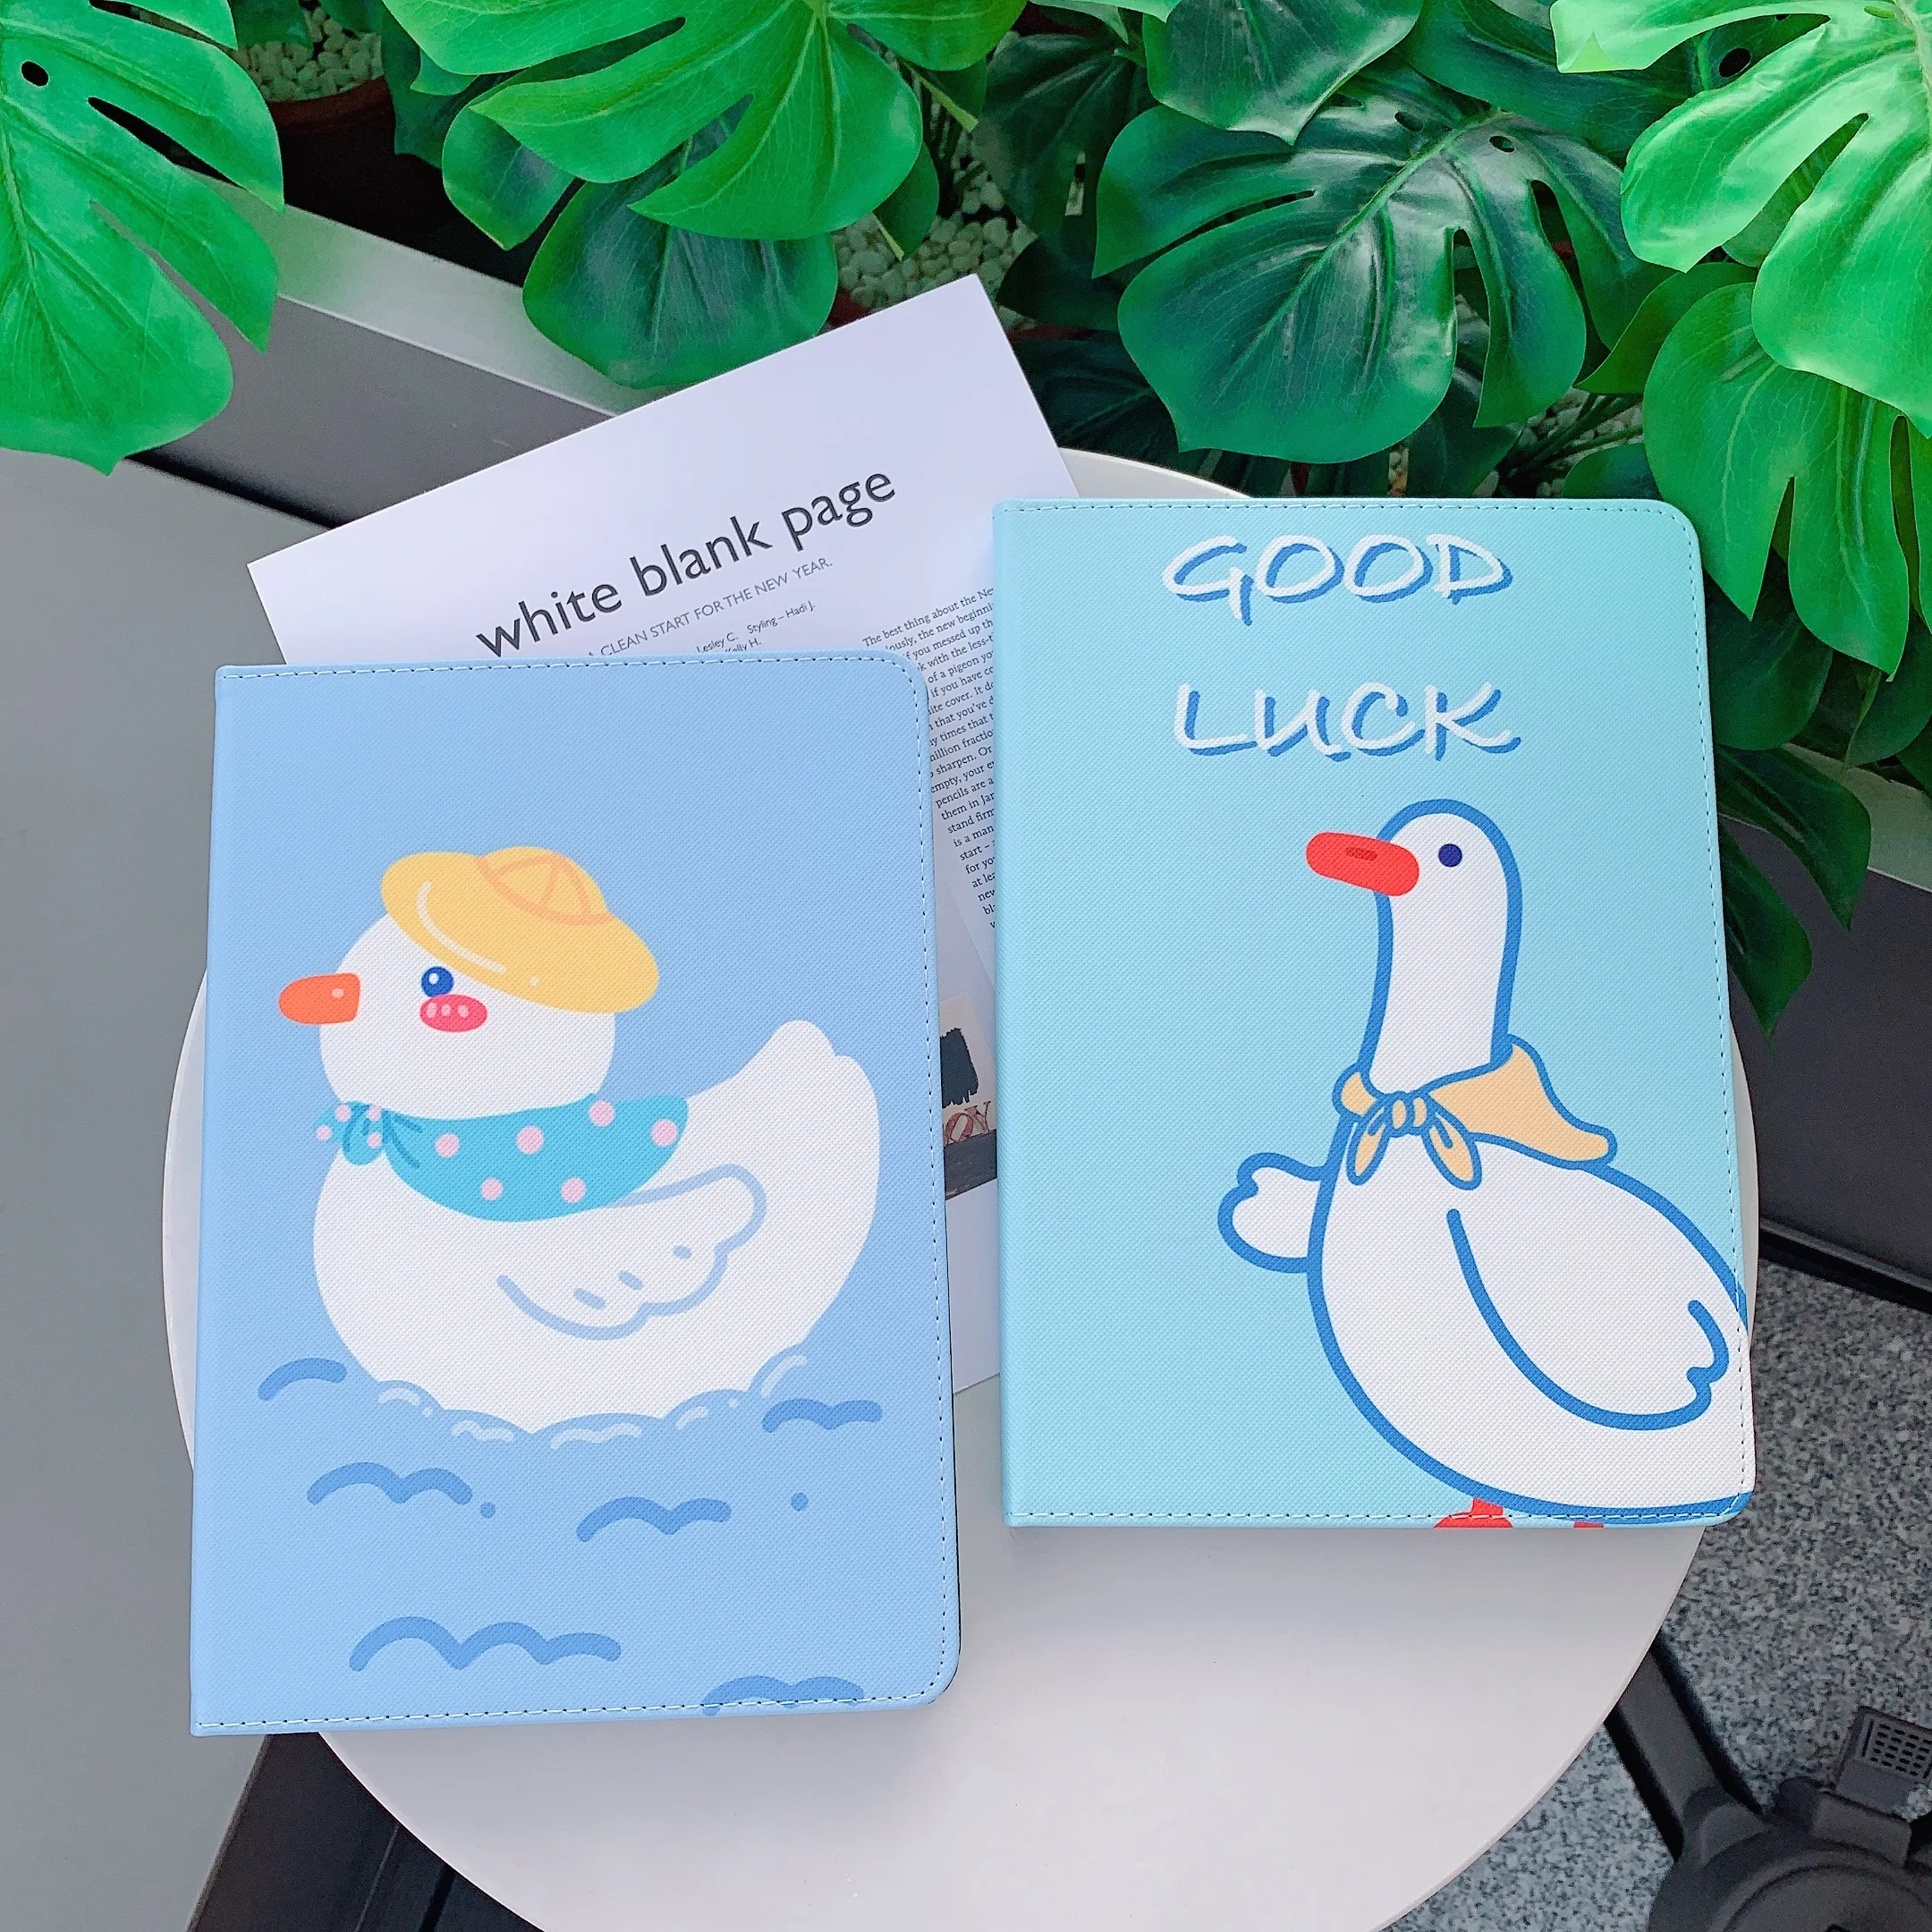 

Good Luck Effort Struggle Swimming Duck Soft Tablet Protective Case For iPad Air 1 2 3 Mini 4 5 Pro 2017 2018 2019 2020 Cover